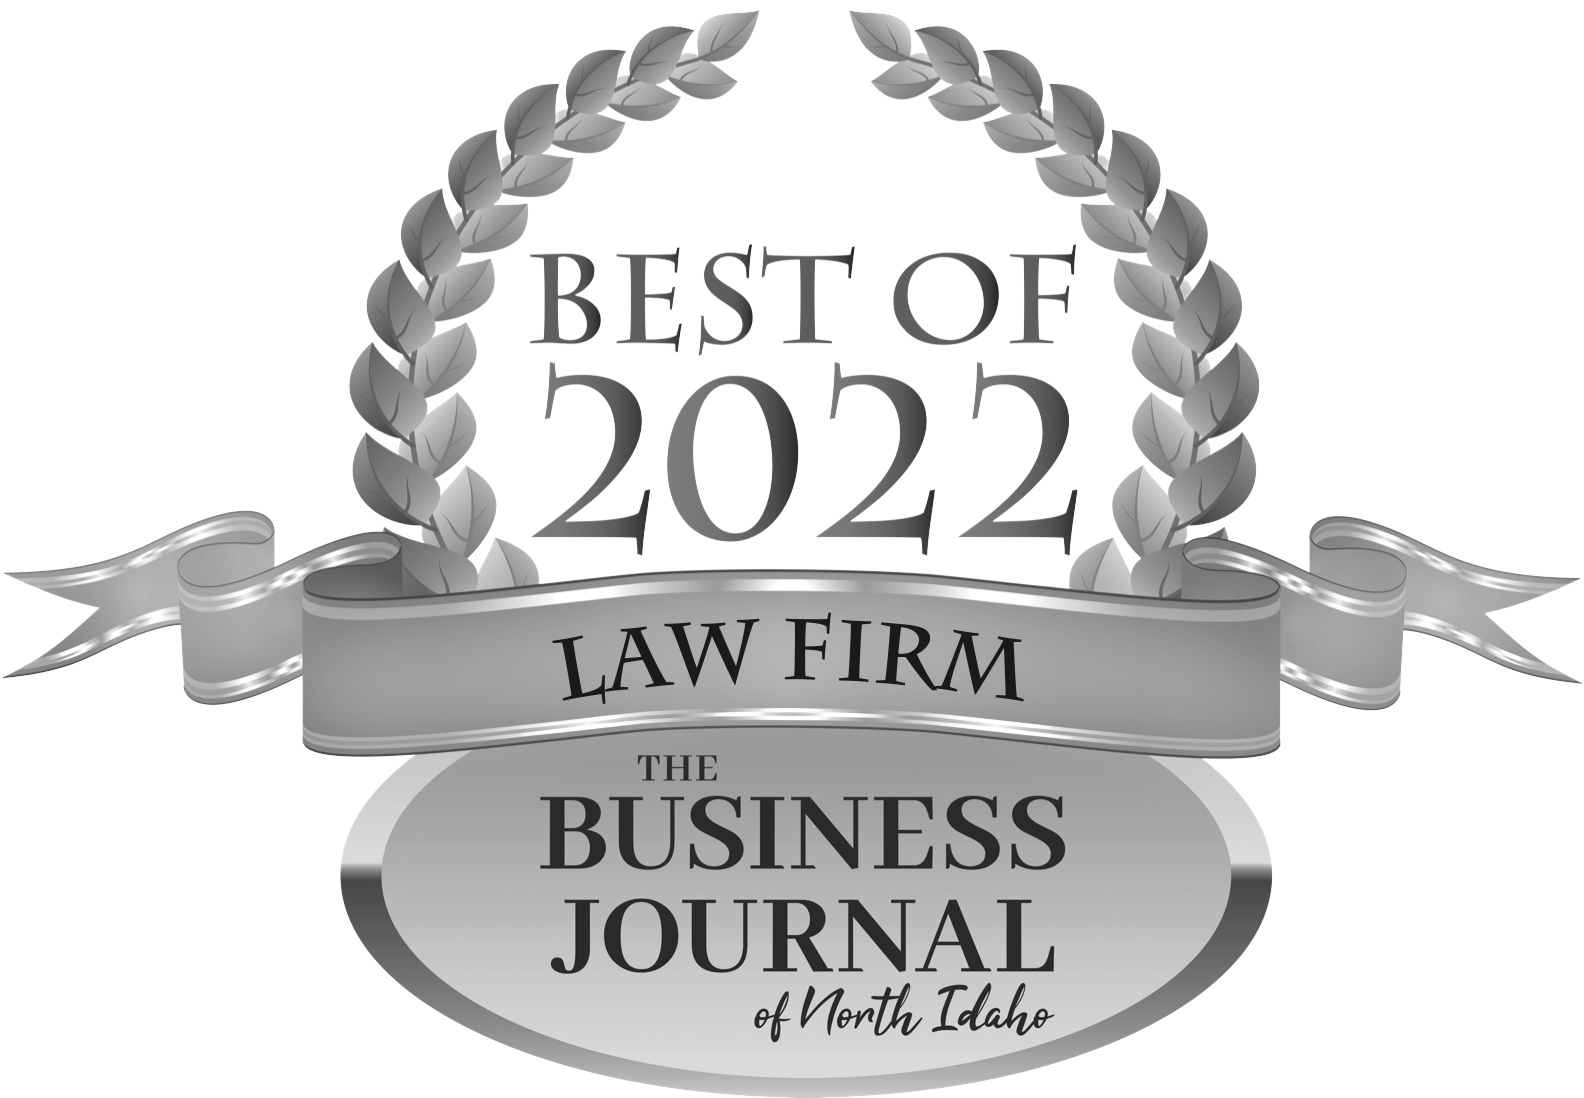 PNGBest of 2022-Silver-Law Firm - Edited